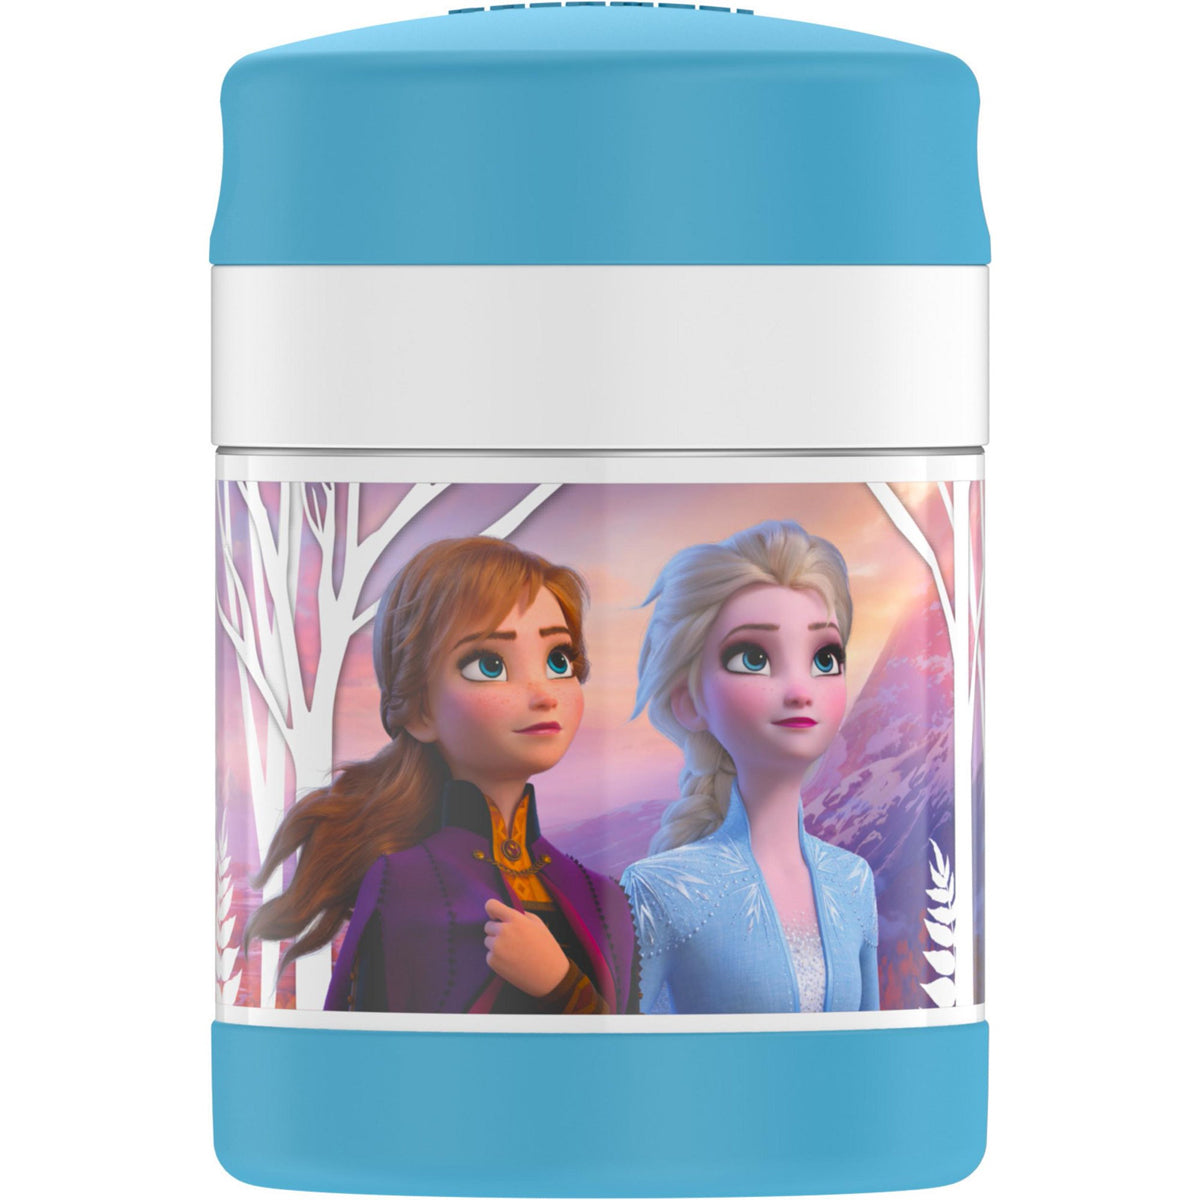 Thermos 10 oz. Kids Funtainer Vacuum Insulated Stainless Steel Food Jar w/ Spoon Thermos